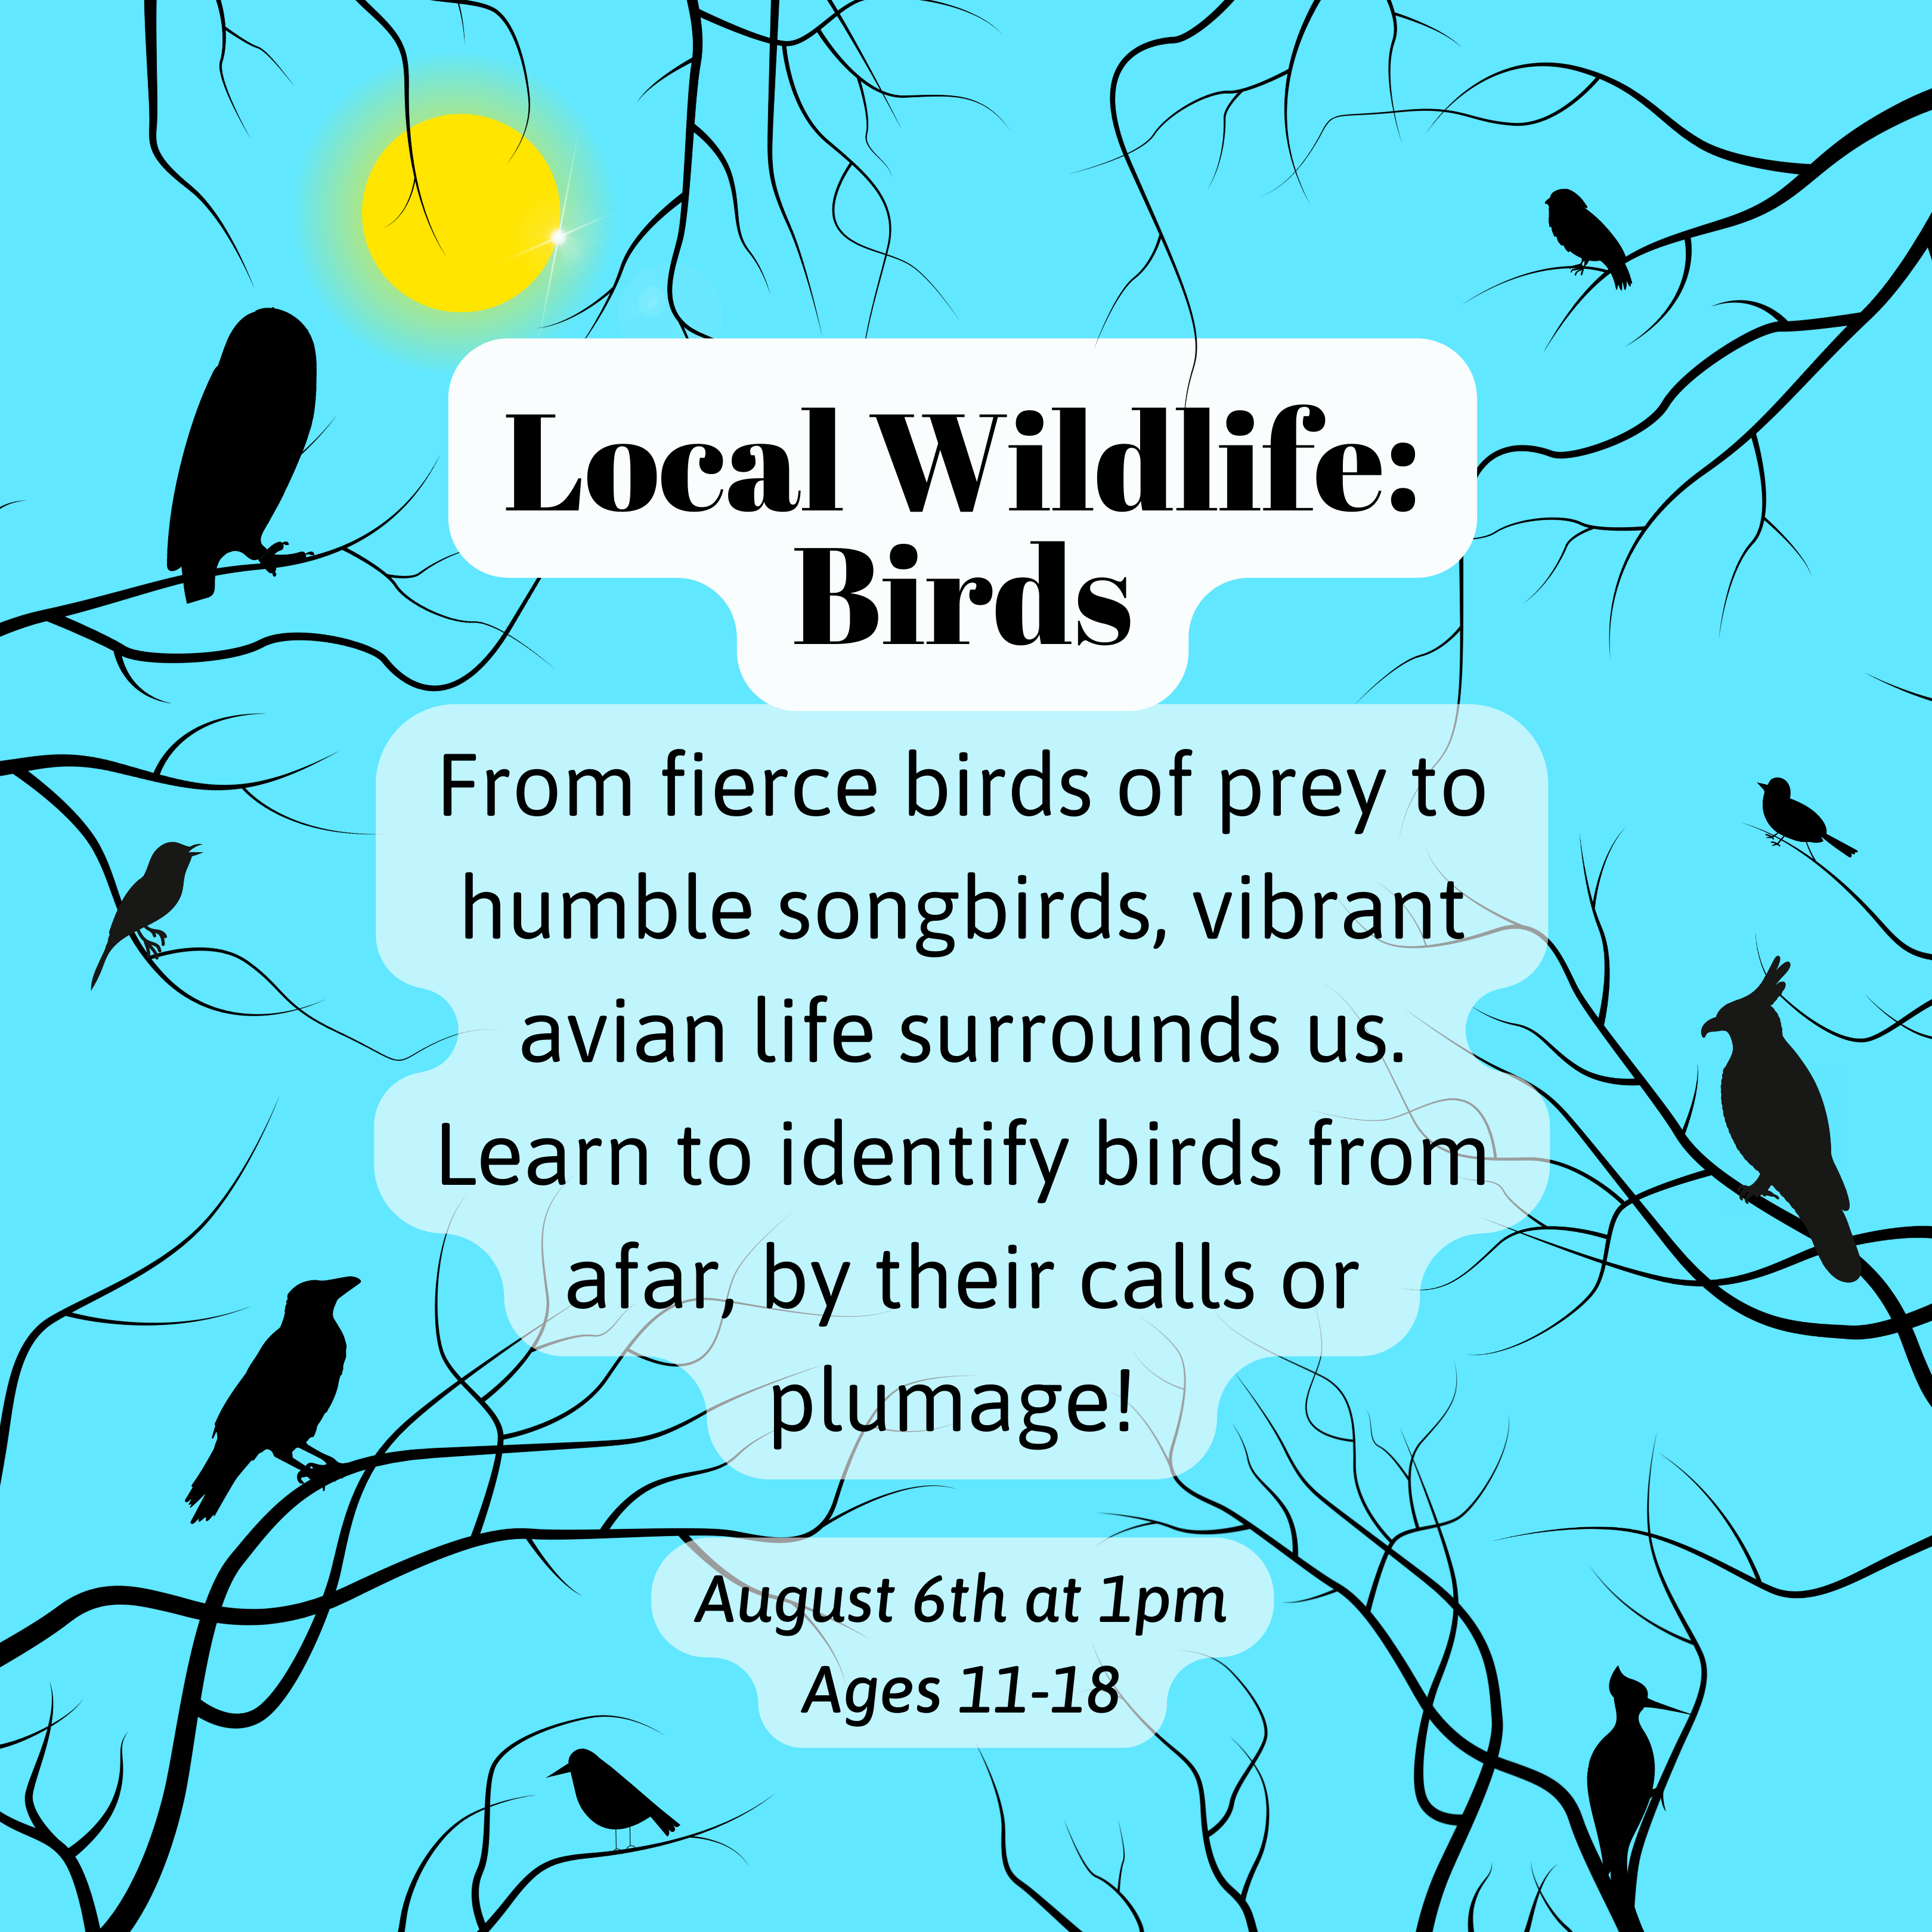 Image of a blue sky and bright sun with the silhouettes of branches and birds. Text reads: Local Wildlife: Birds! From fierce birds of prey to humble songbirds, vibrant avian life surrounds us. Learn to identify birds from afar, by their calls or plumage! August 6th at 1pm. Ages 11-18.